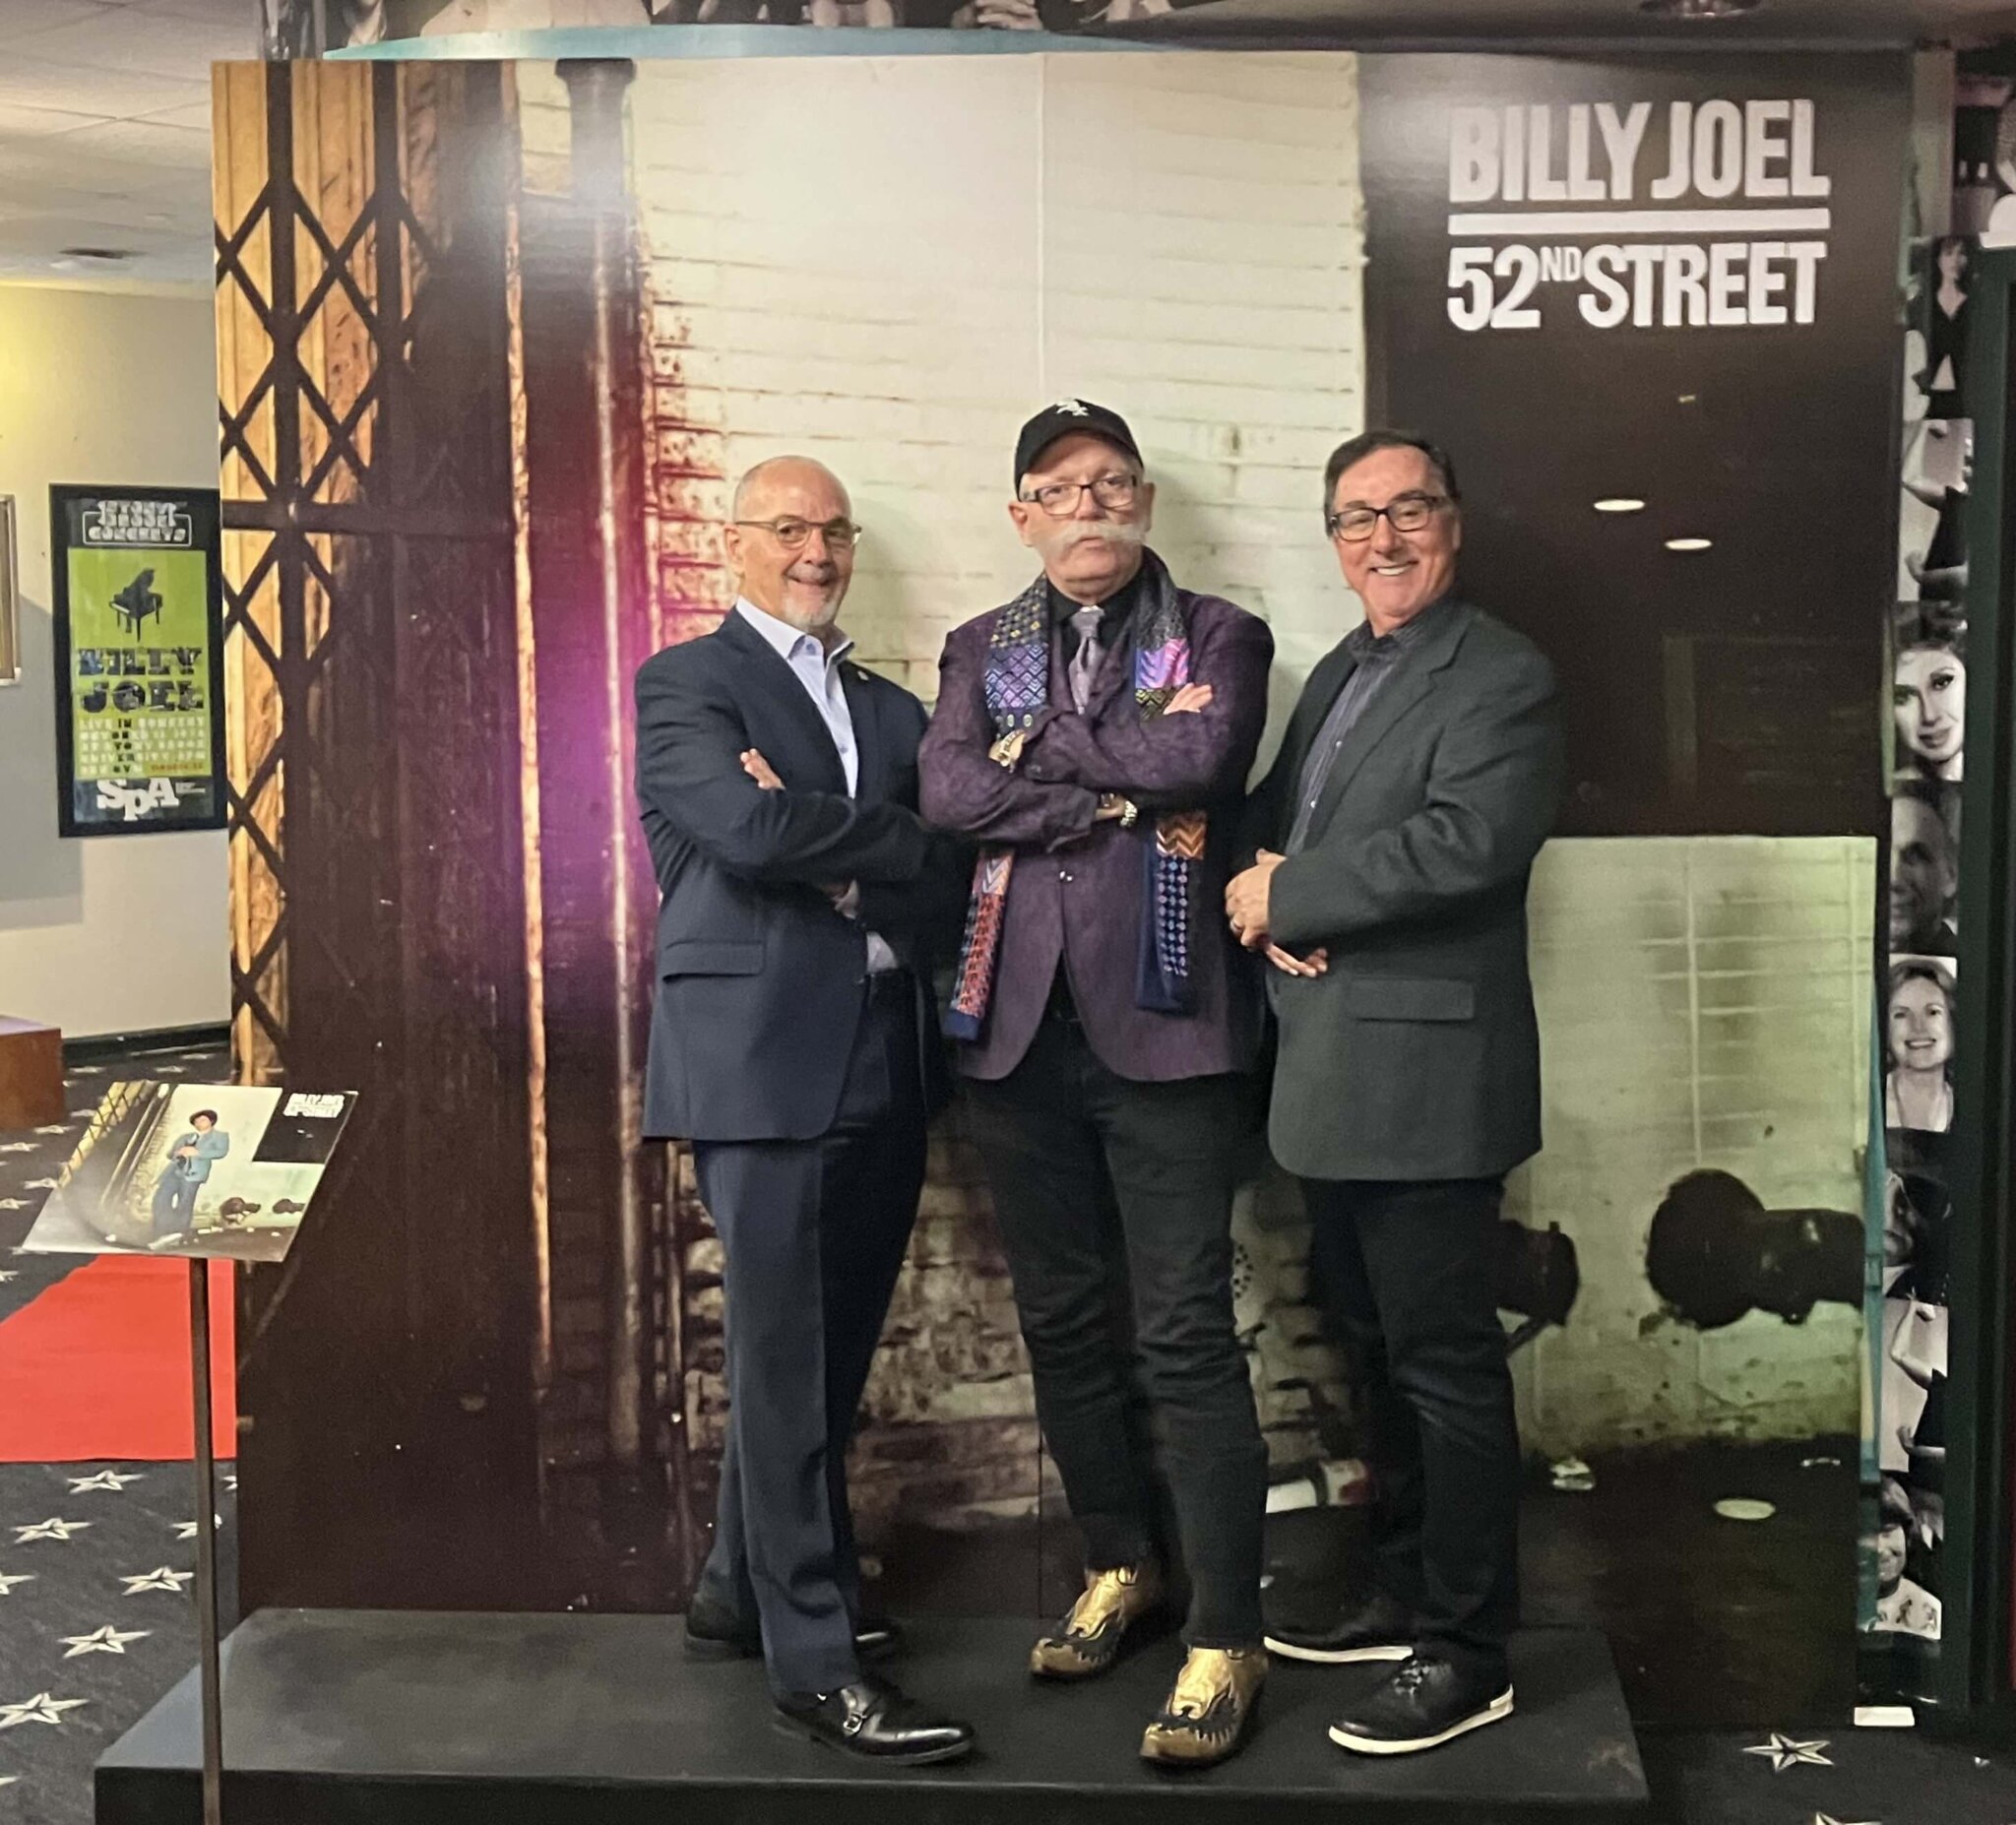 Joe Carofano, Kevin O’Callaghan and Ernie Canadeo at the LIMEHOF Billy Joel exhibit announcement, Long Island Music and Entertainment Hall of Fame